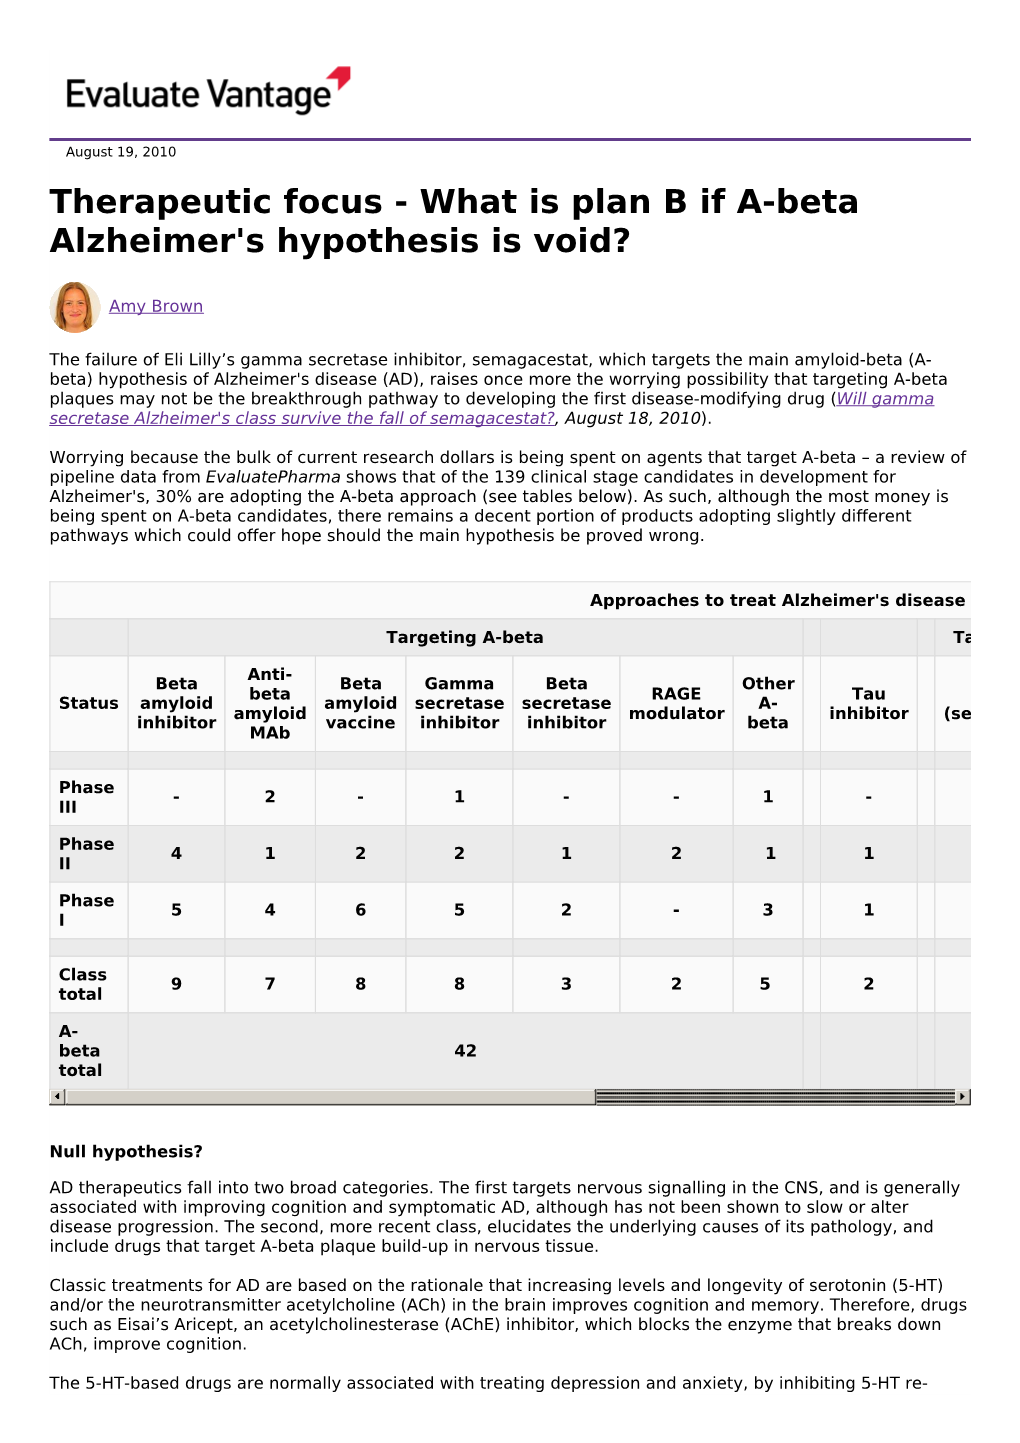 What Is Plan B If A-Beta Alzheimer's Hypothesis Is Void?